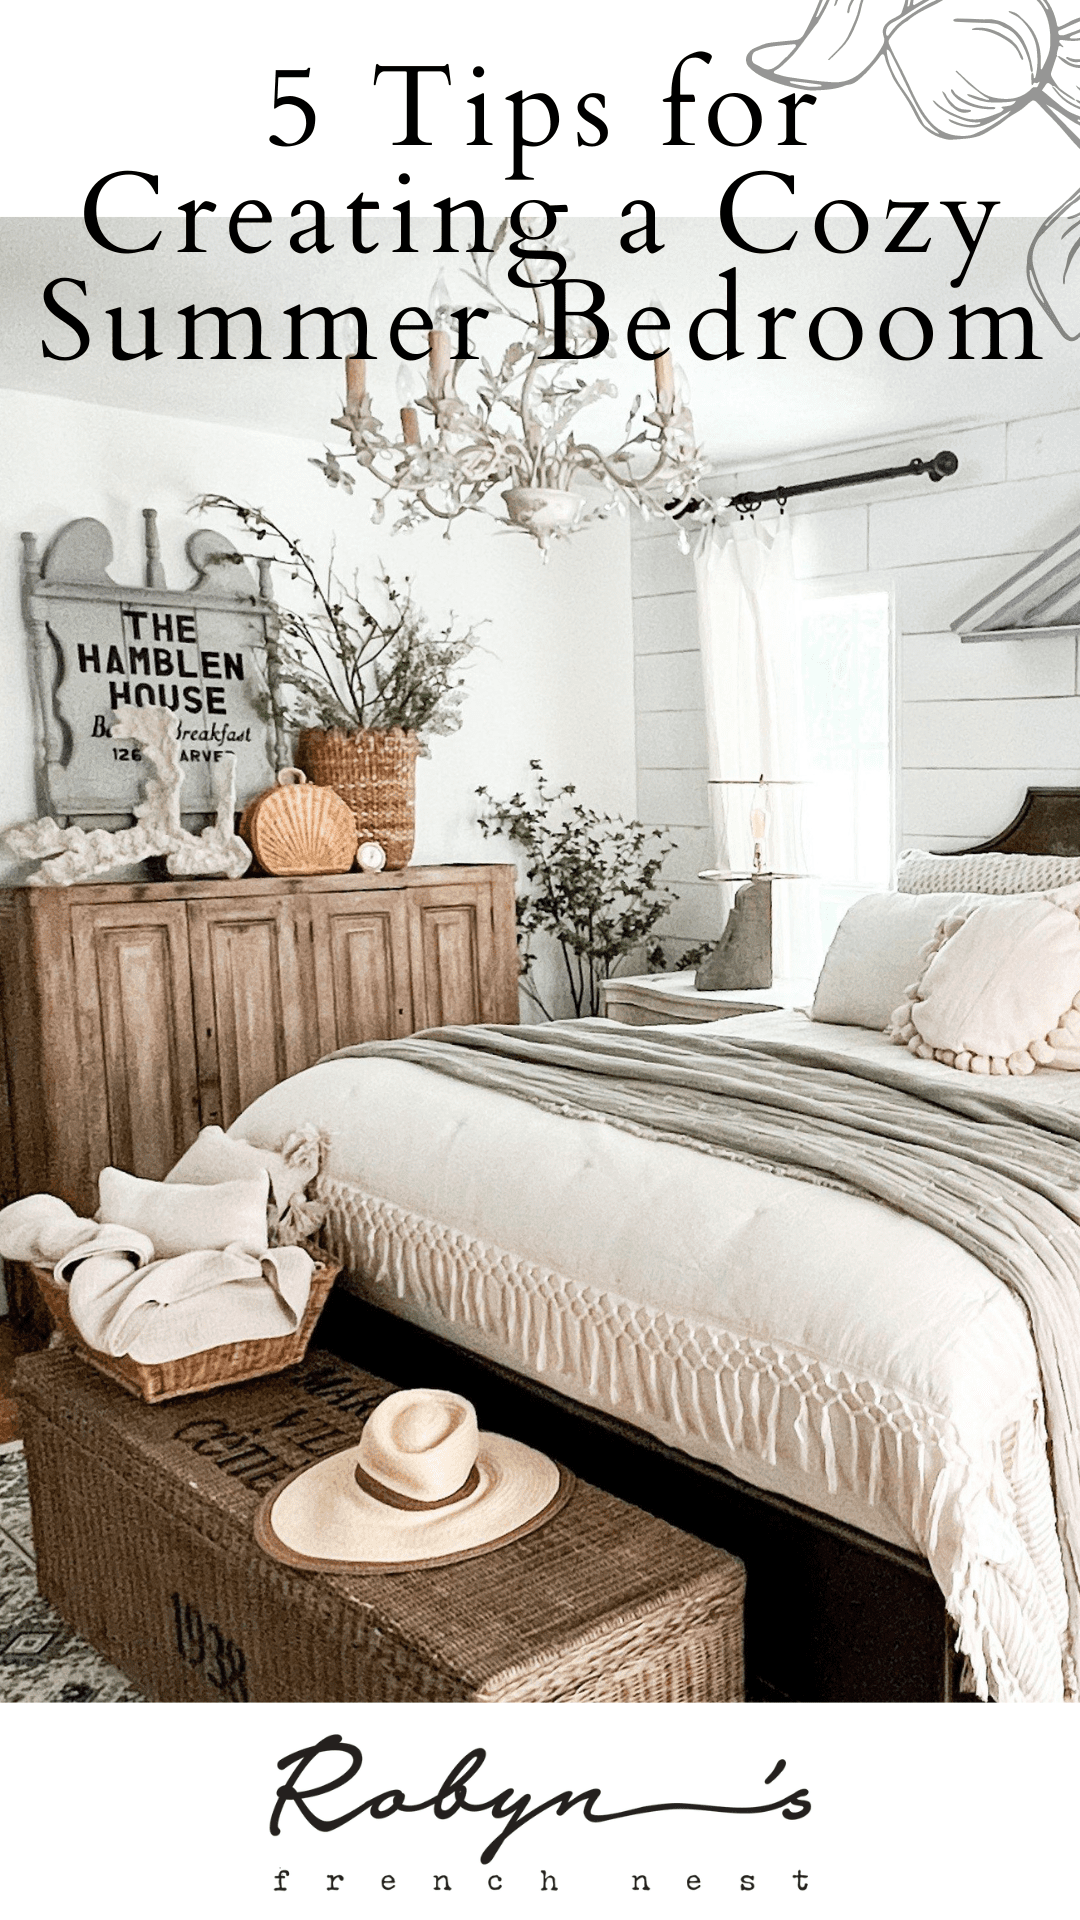 5 Things You Need for a Beautiful, Cozy Summer Bedroom